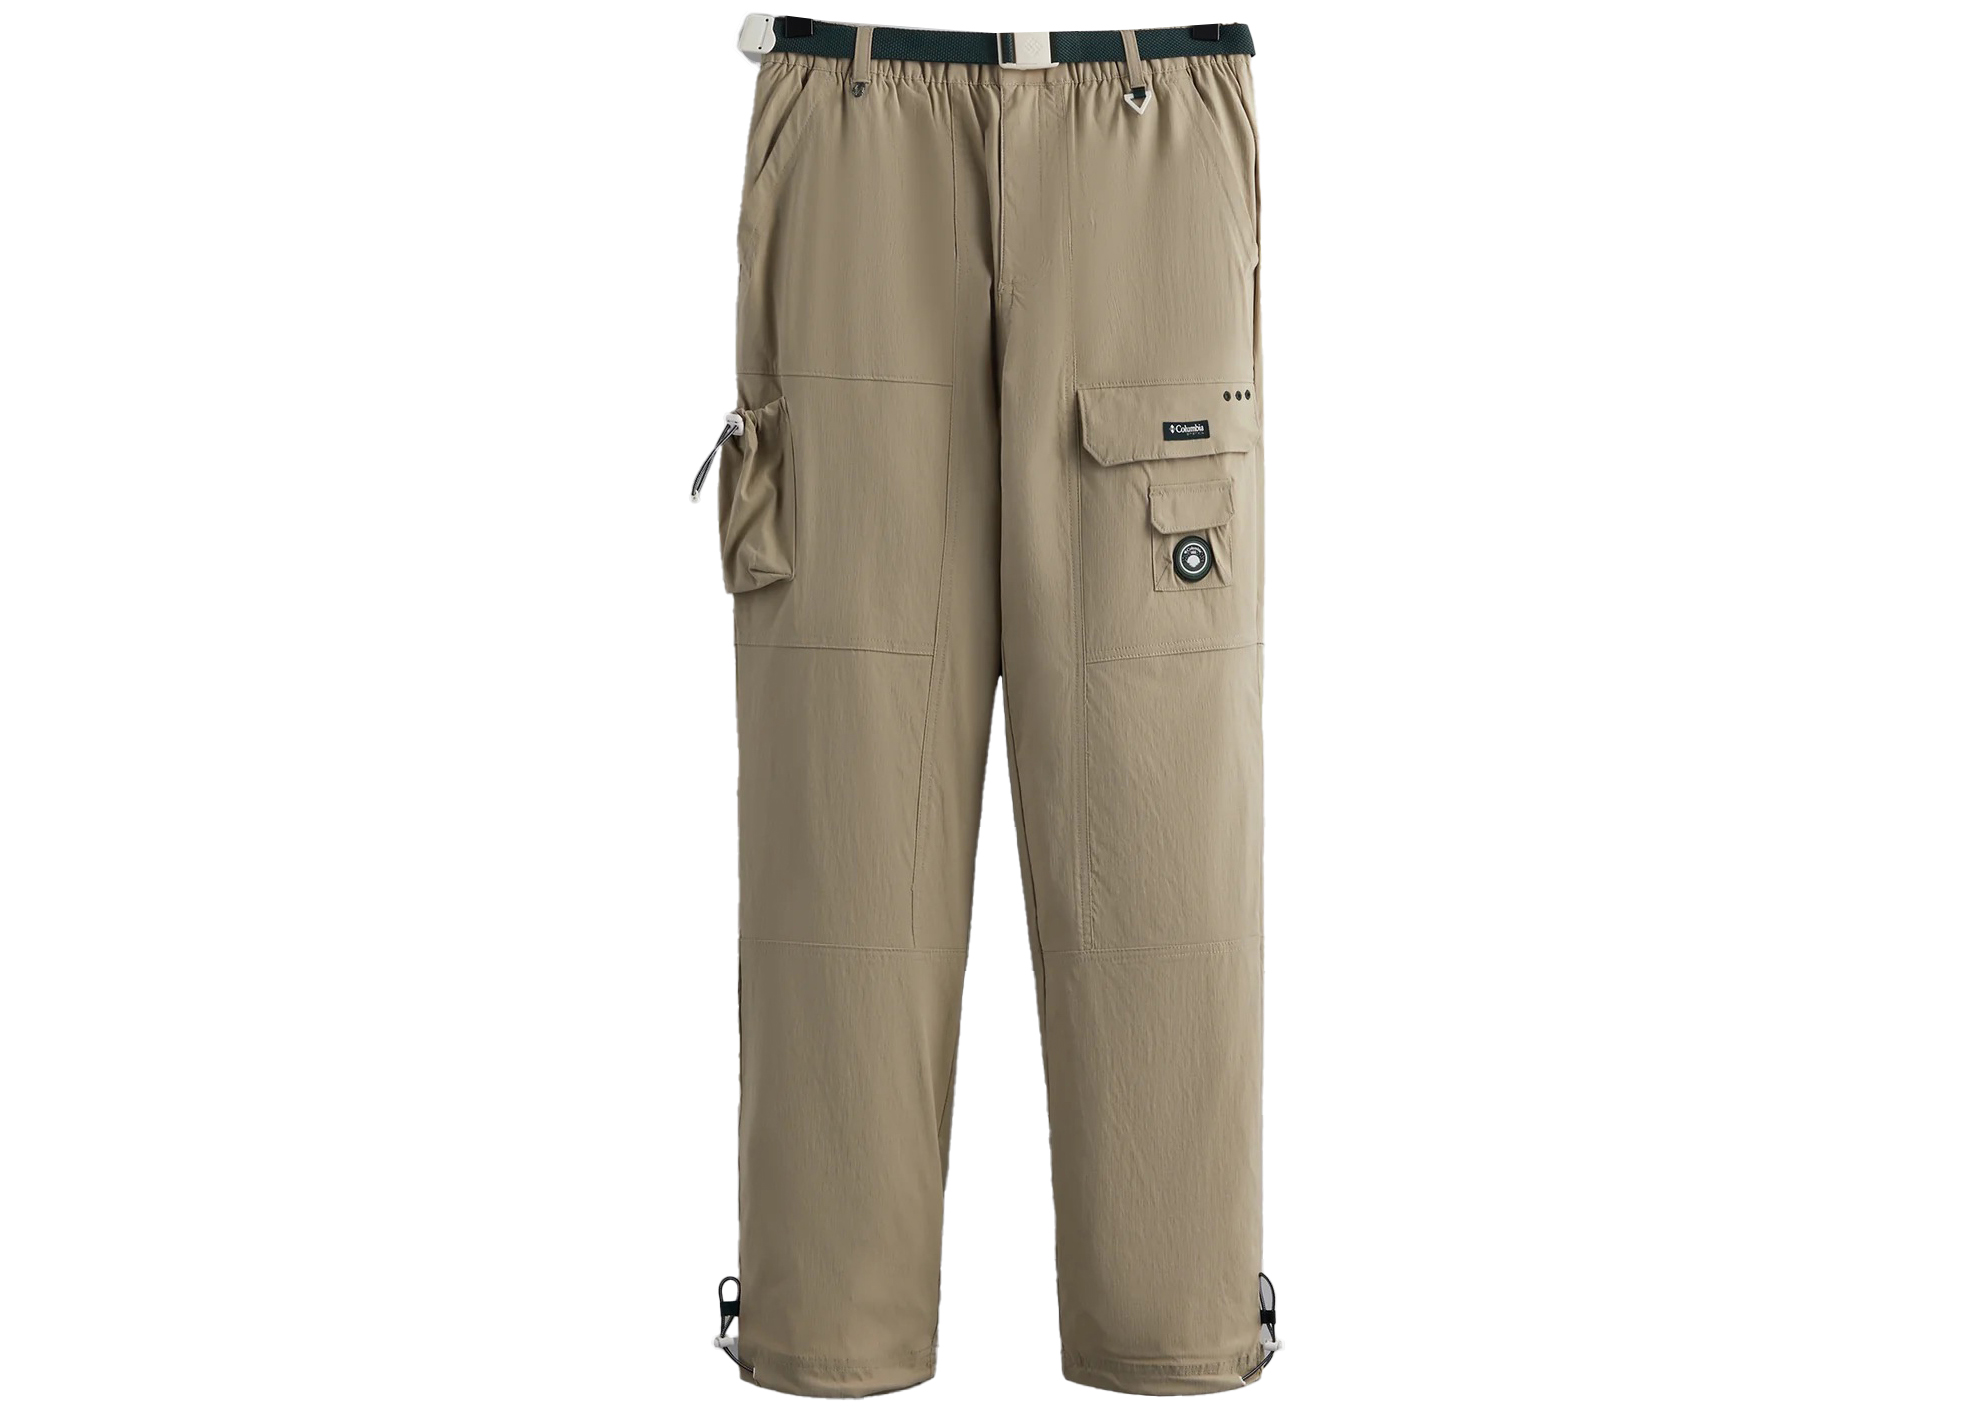 Columbia PFG Aruba Convertible Pant  Womens Review  Tested by GearLab